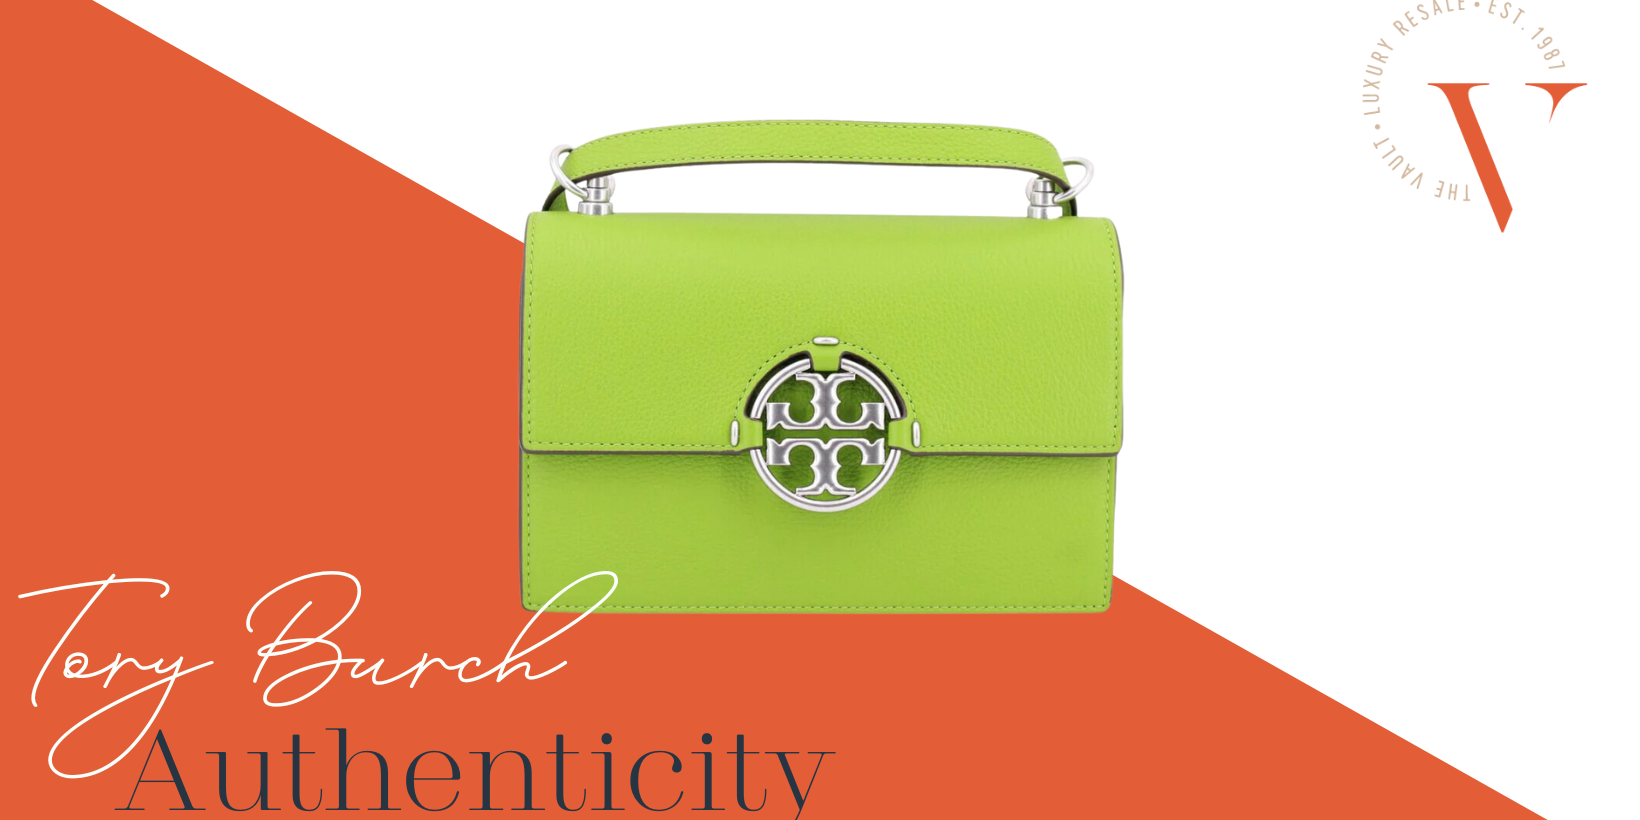 How to Authenticate Your Tory Burch